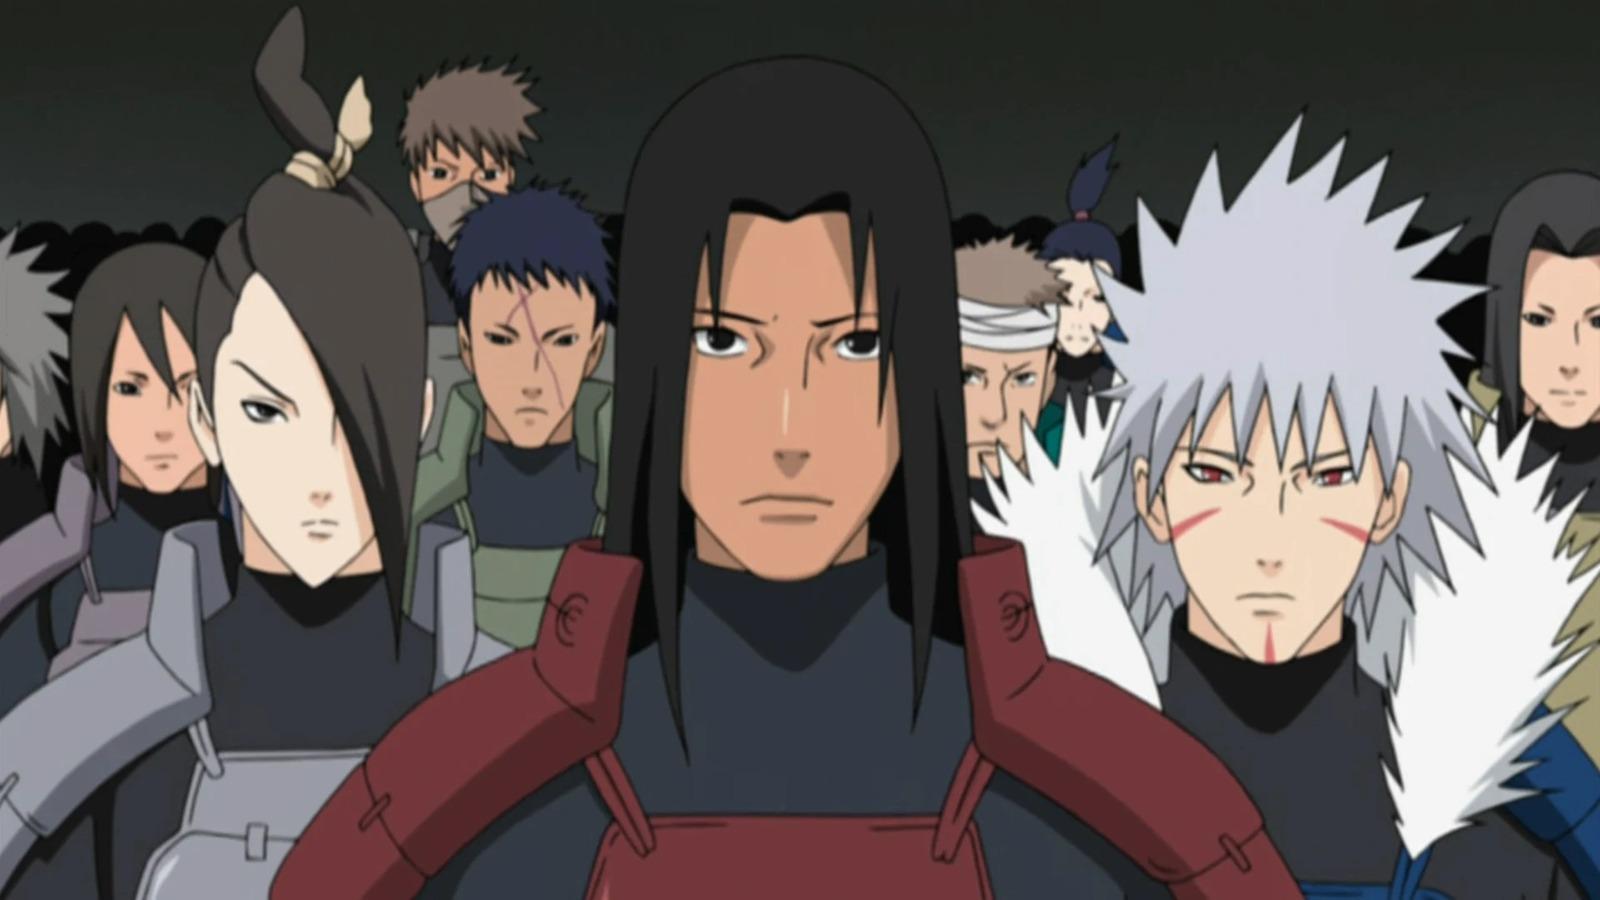 An image of the Senju Clan members from Naruto